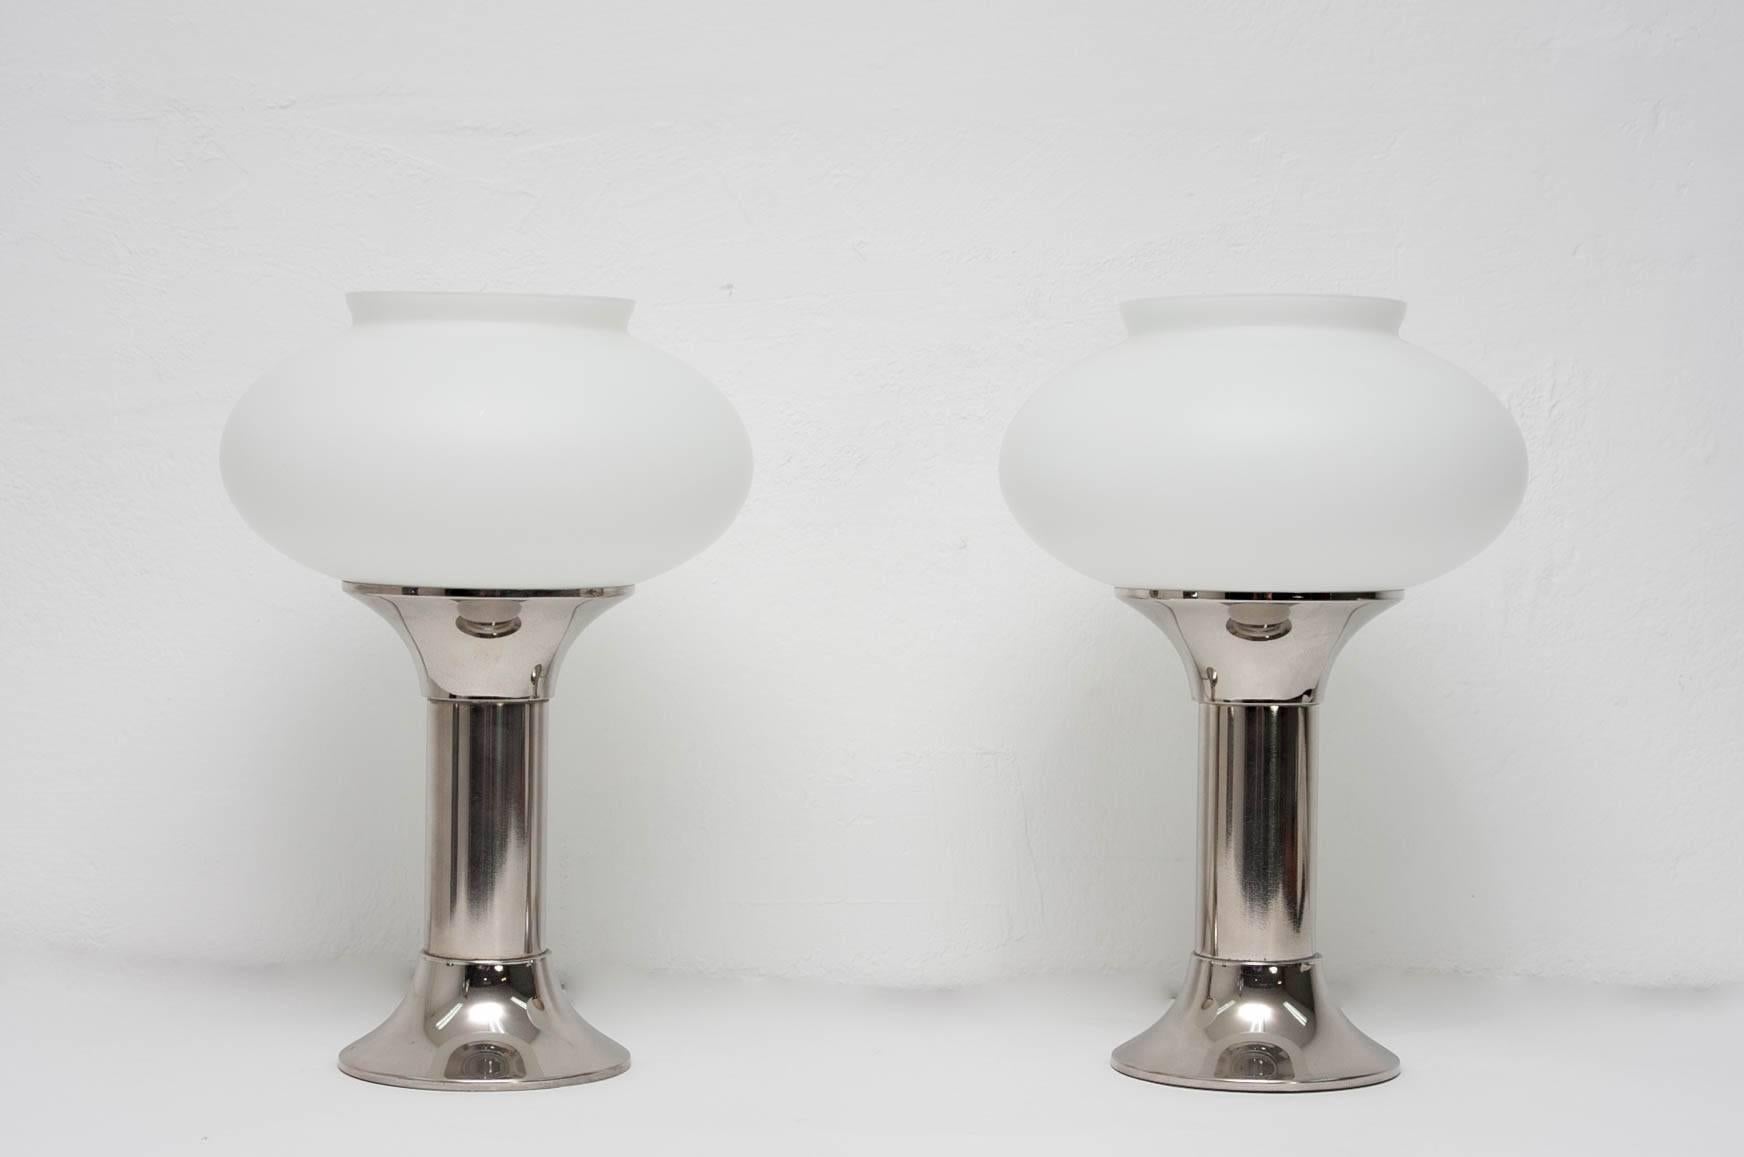 Pair of stylish table lamps from the East-German VEB Narva Company, 1960s. Brushed aluminum bases with satin glass shades.